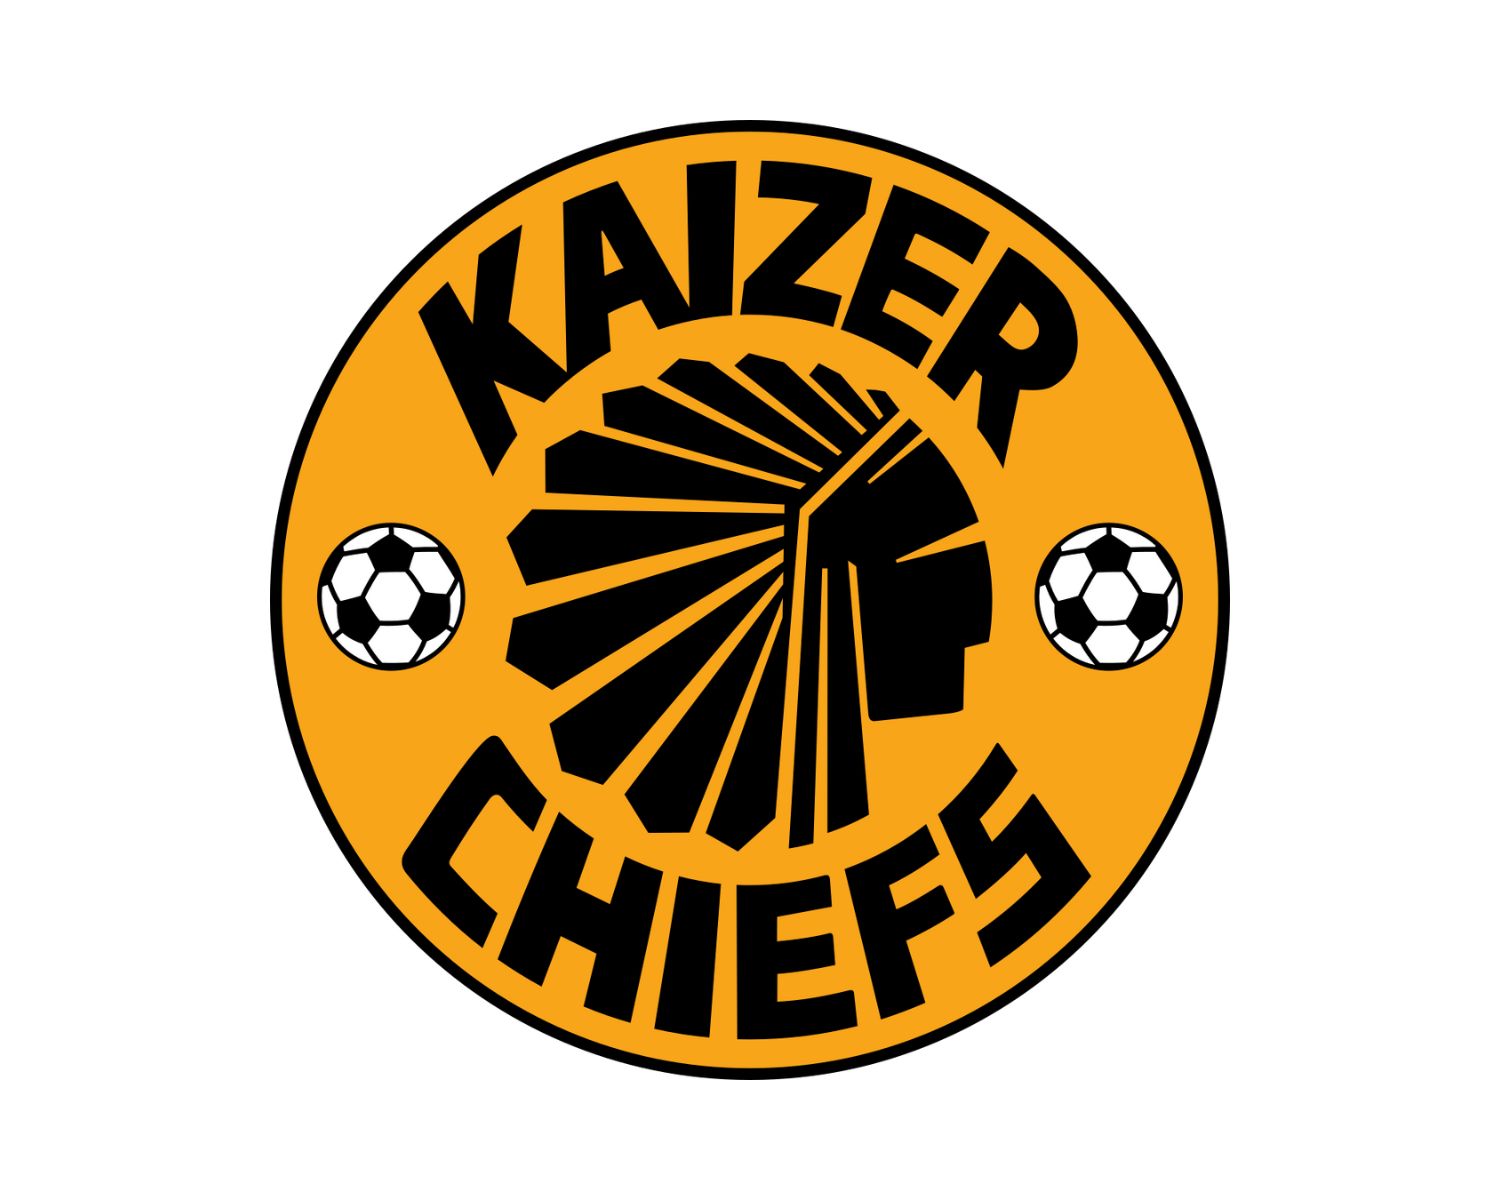 Kaizer Chiefs FC: 21 Football Club Facts - Facts.net